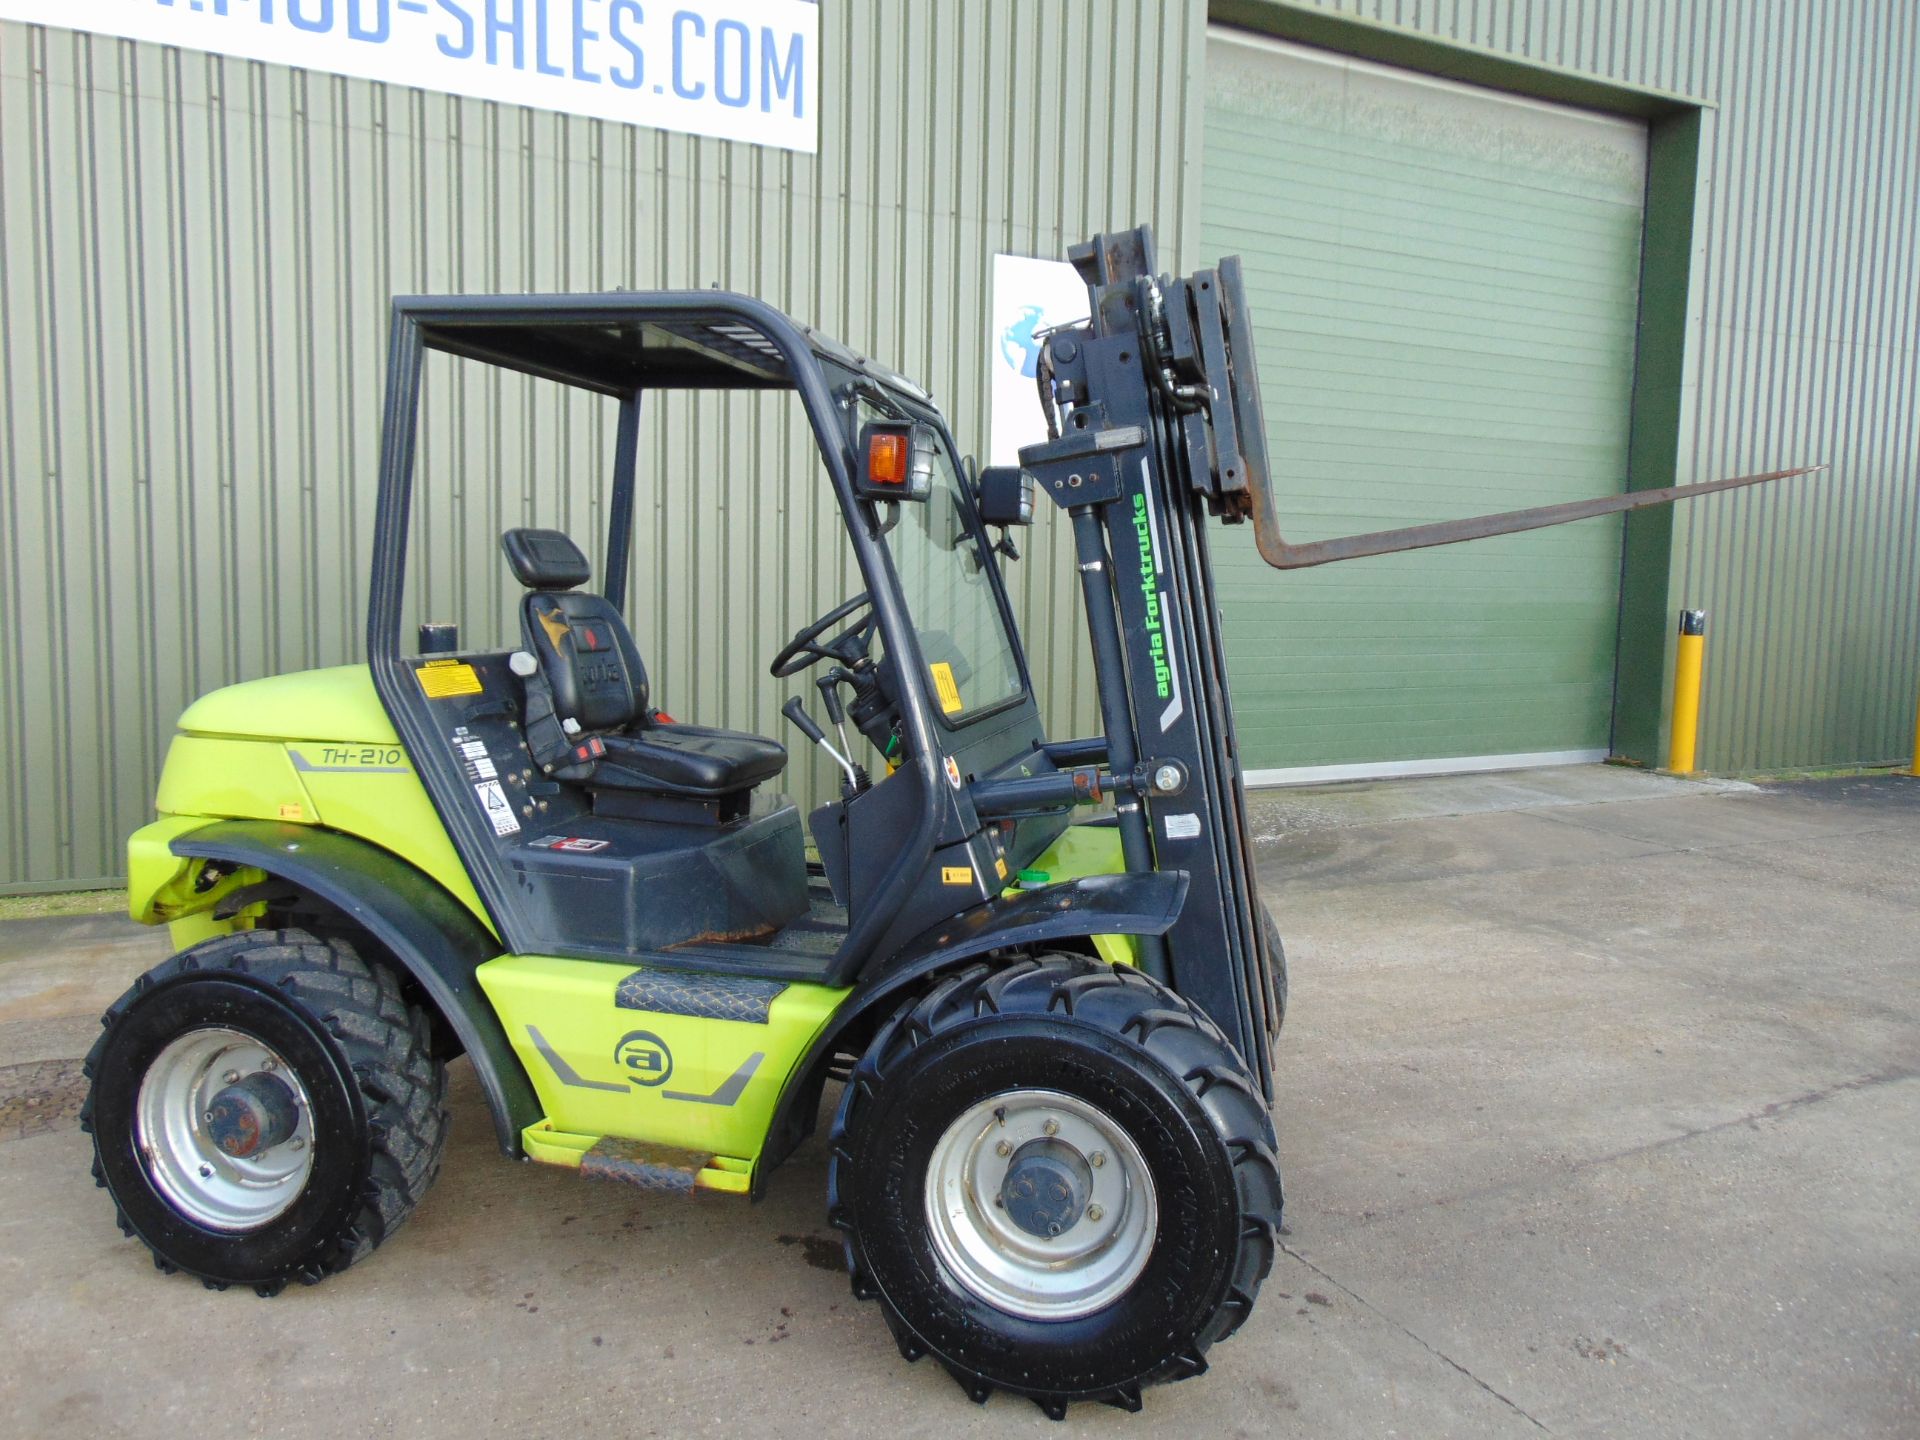 2011 Agrimac Agria TH210 4x4 Rough Terrain Diesel Forklift ONLY 1,918 HOURS!!! - Image 14 of 30